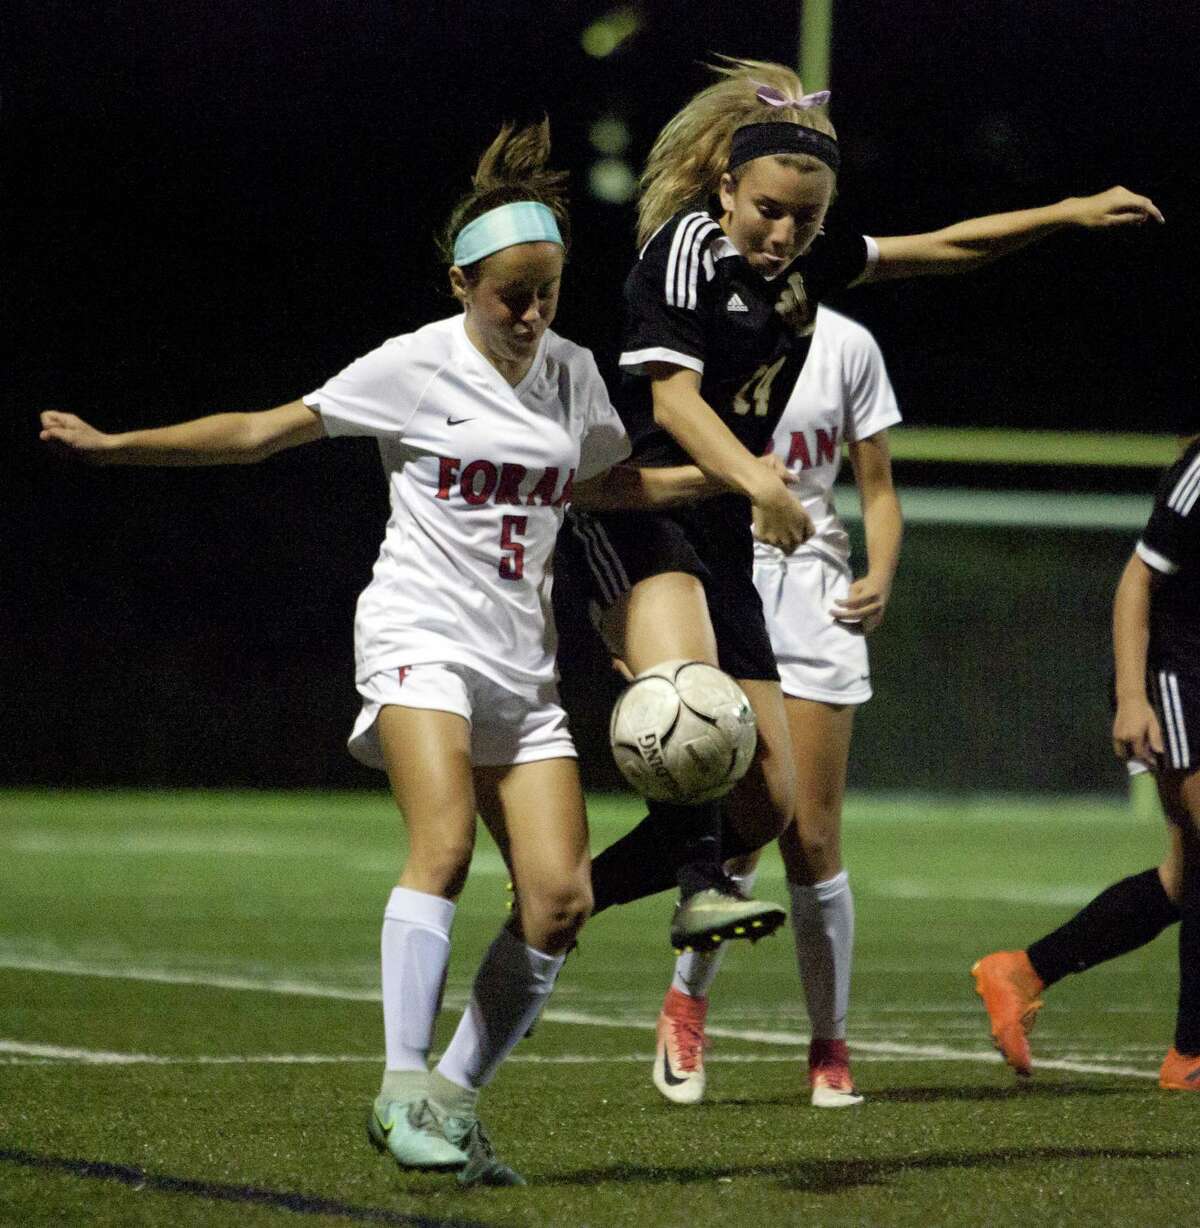 Jonathan Law's Skylar Sosa, right, leaps in to intercept the ball in front of Foran's Isabel Morales during girls soccer action in Milford, Conn., on Wednesday Oct. 3, 2018.